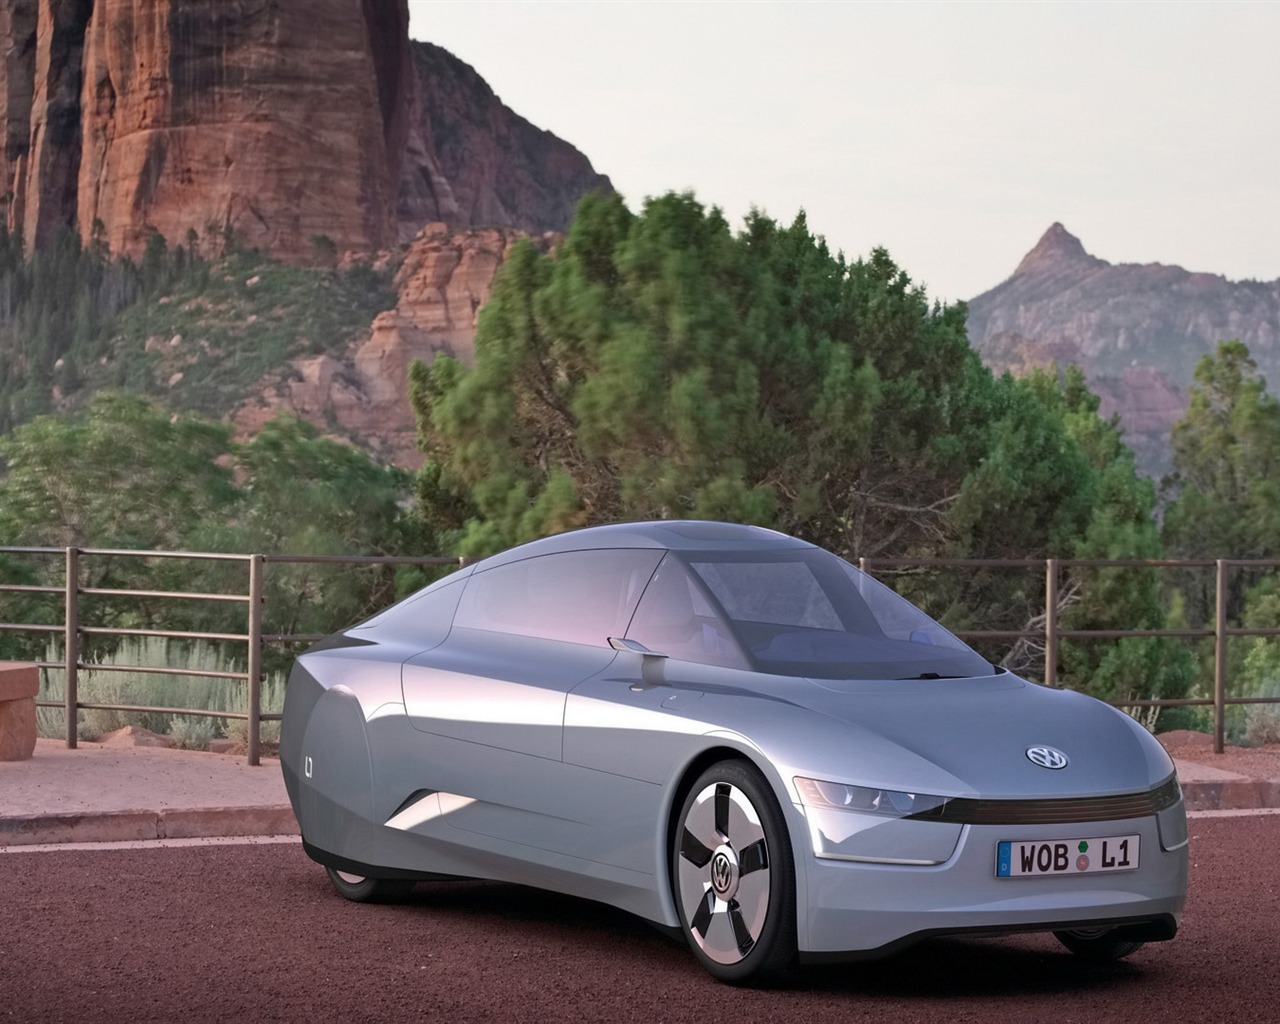 Volkswagen L1 Tapety Concept Car #4 - 1280x1024